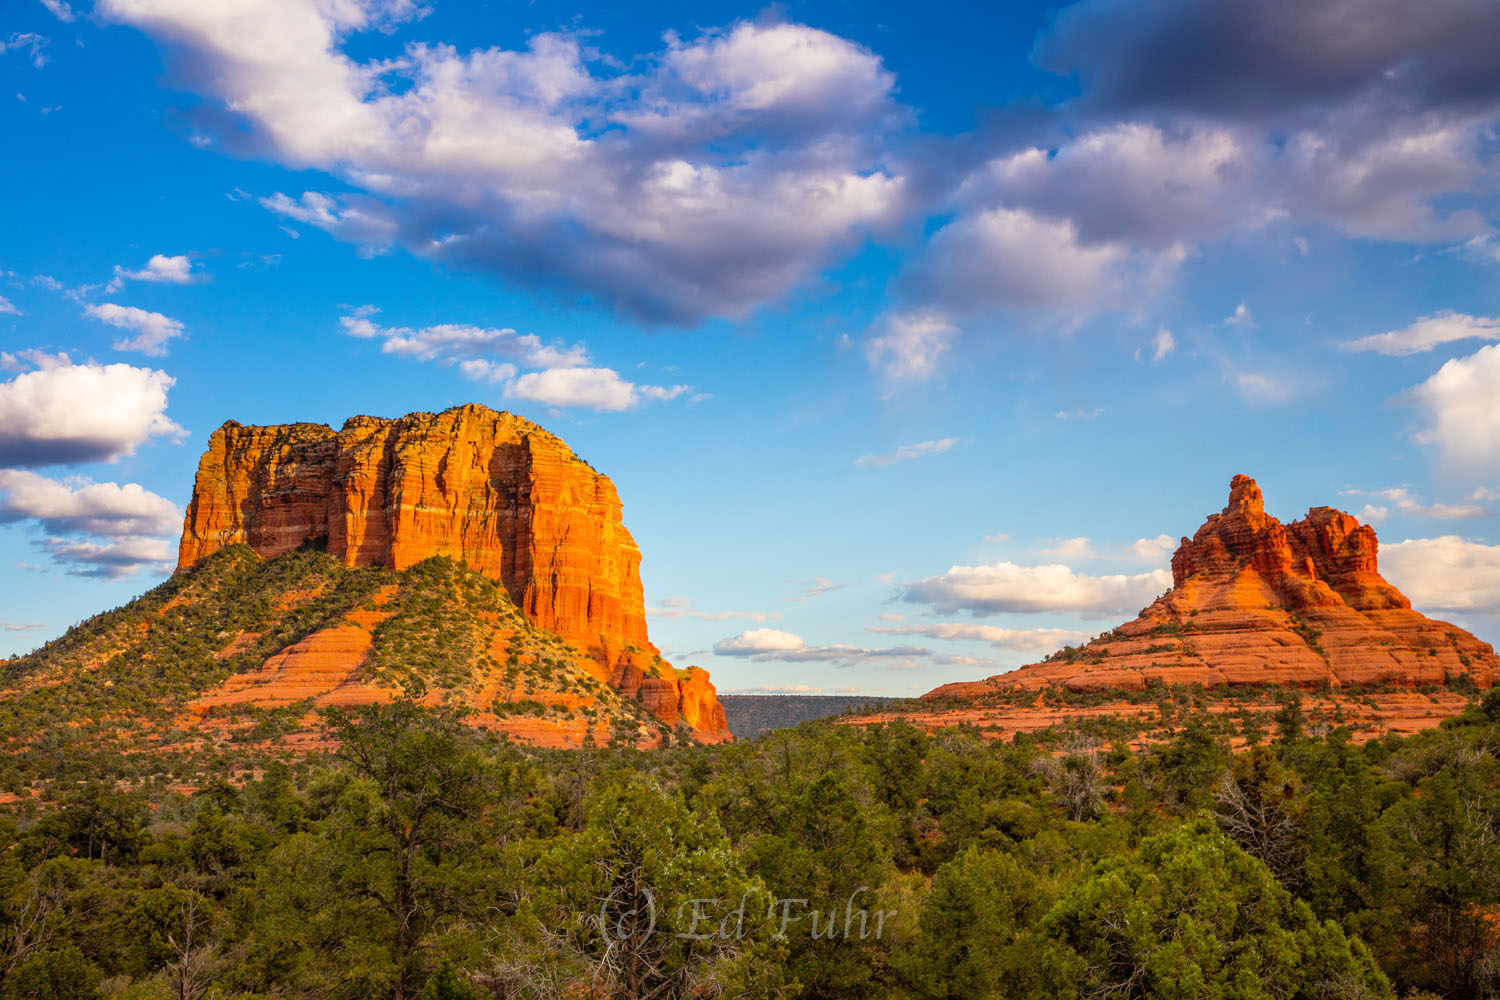 The rock country surrounding Sedona turns fiery red shortly before sunset.